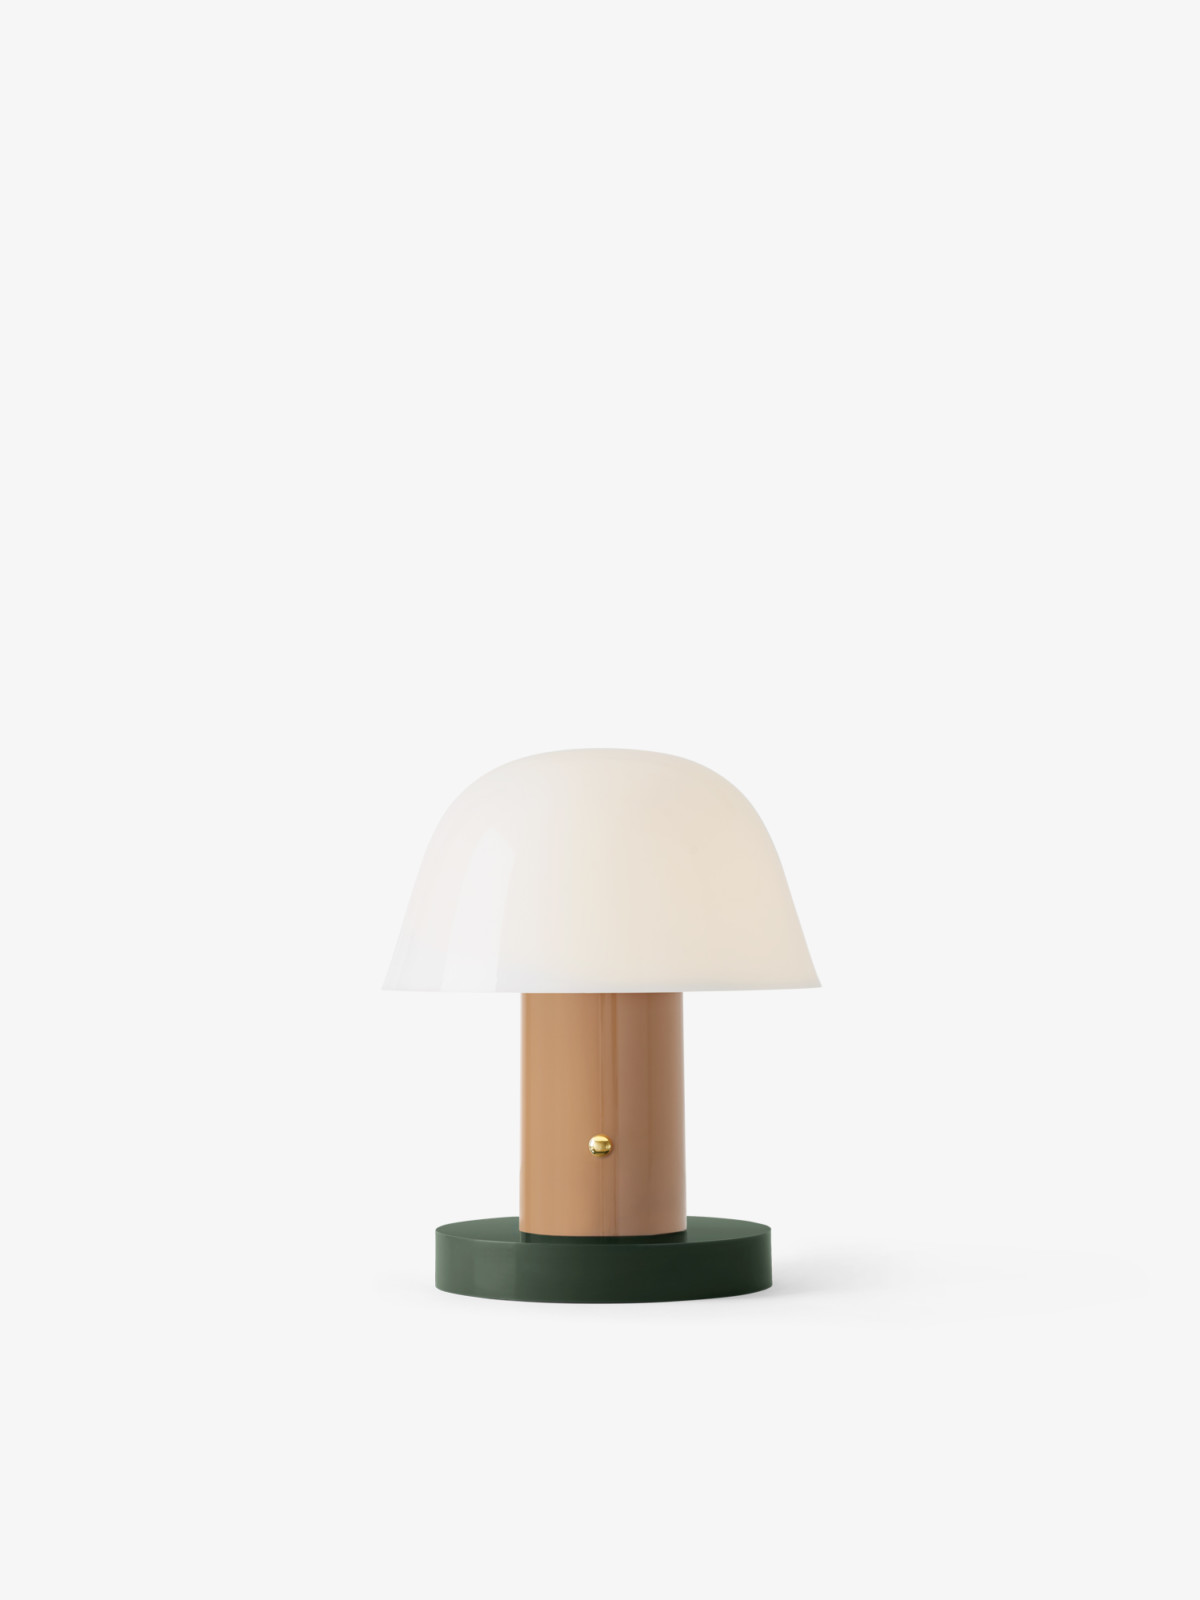 &Tradition Setago JH27 Jaime Hayon 2019 | Nude & Forest Lamp